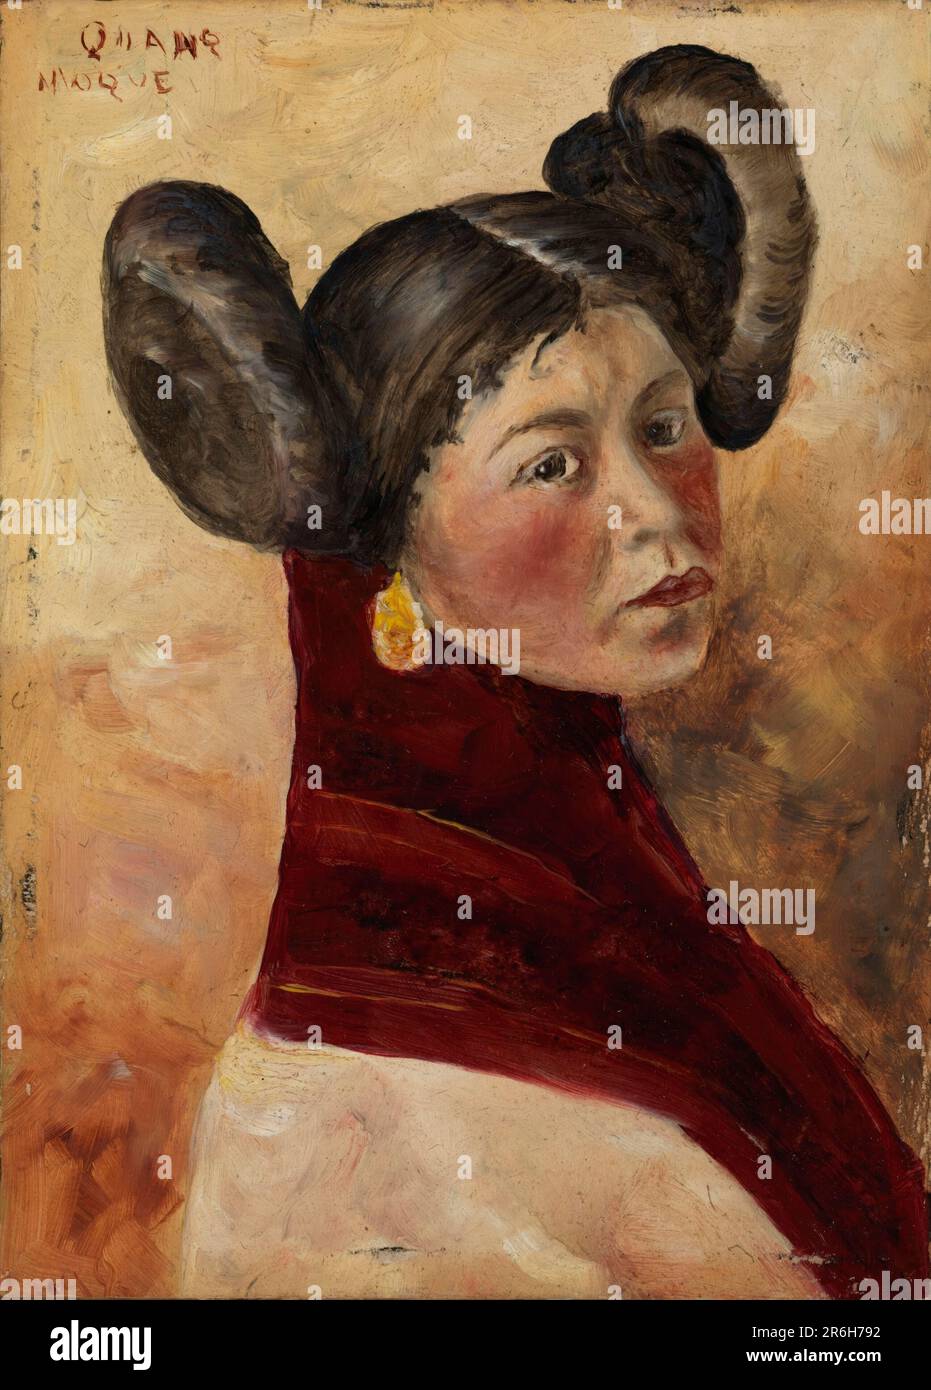 Quanq. oil on paper. Date: 1898. Museum: Smithsonian American Art Museum. Quang. Stock Photo